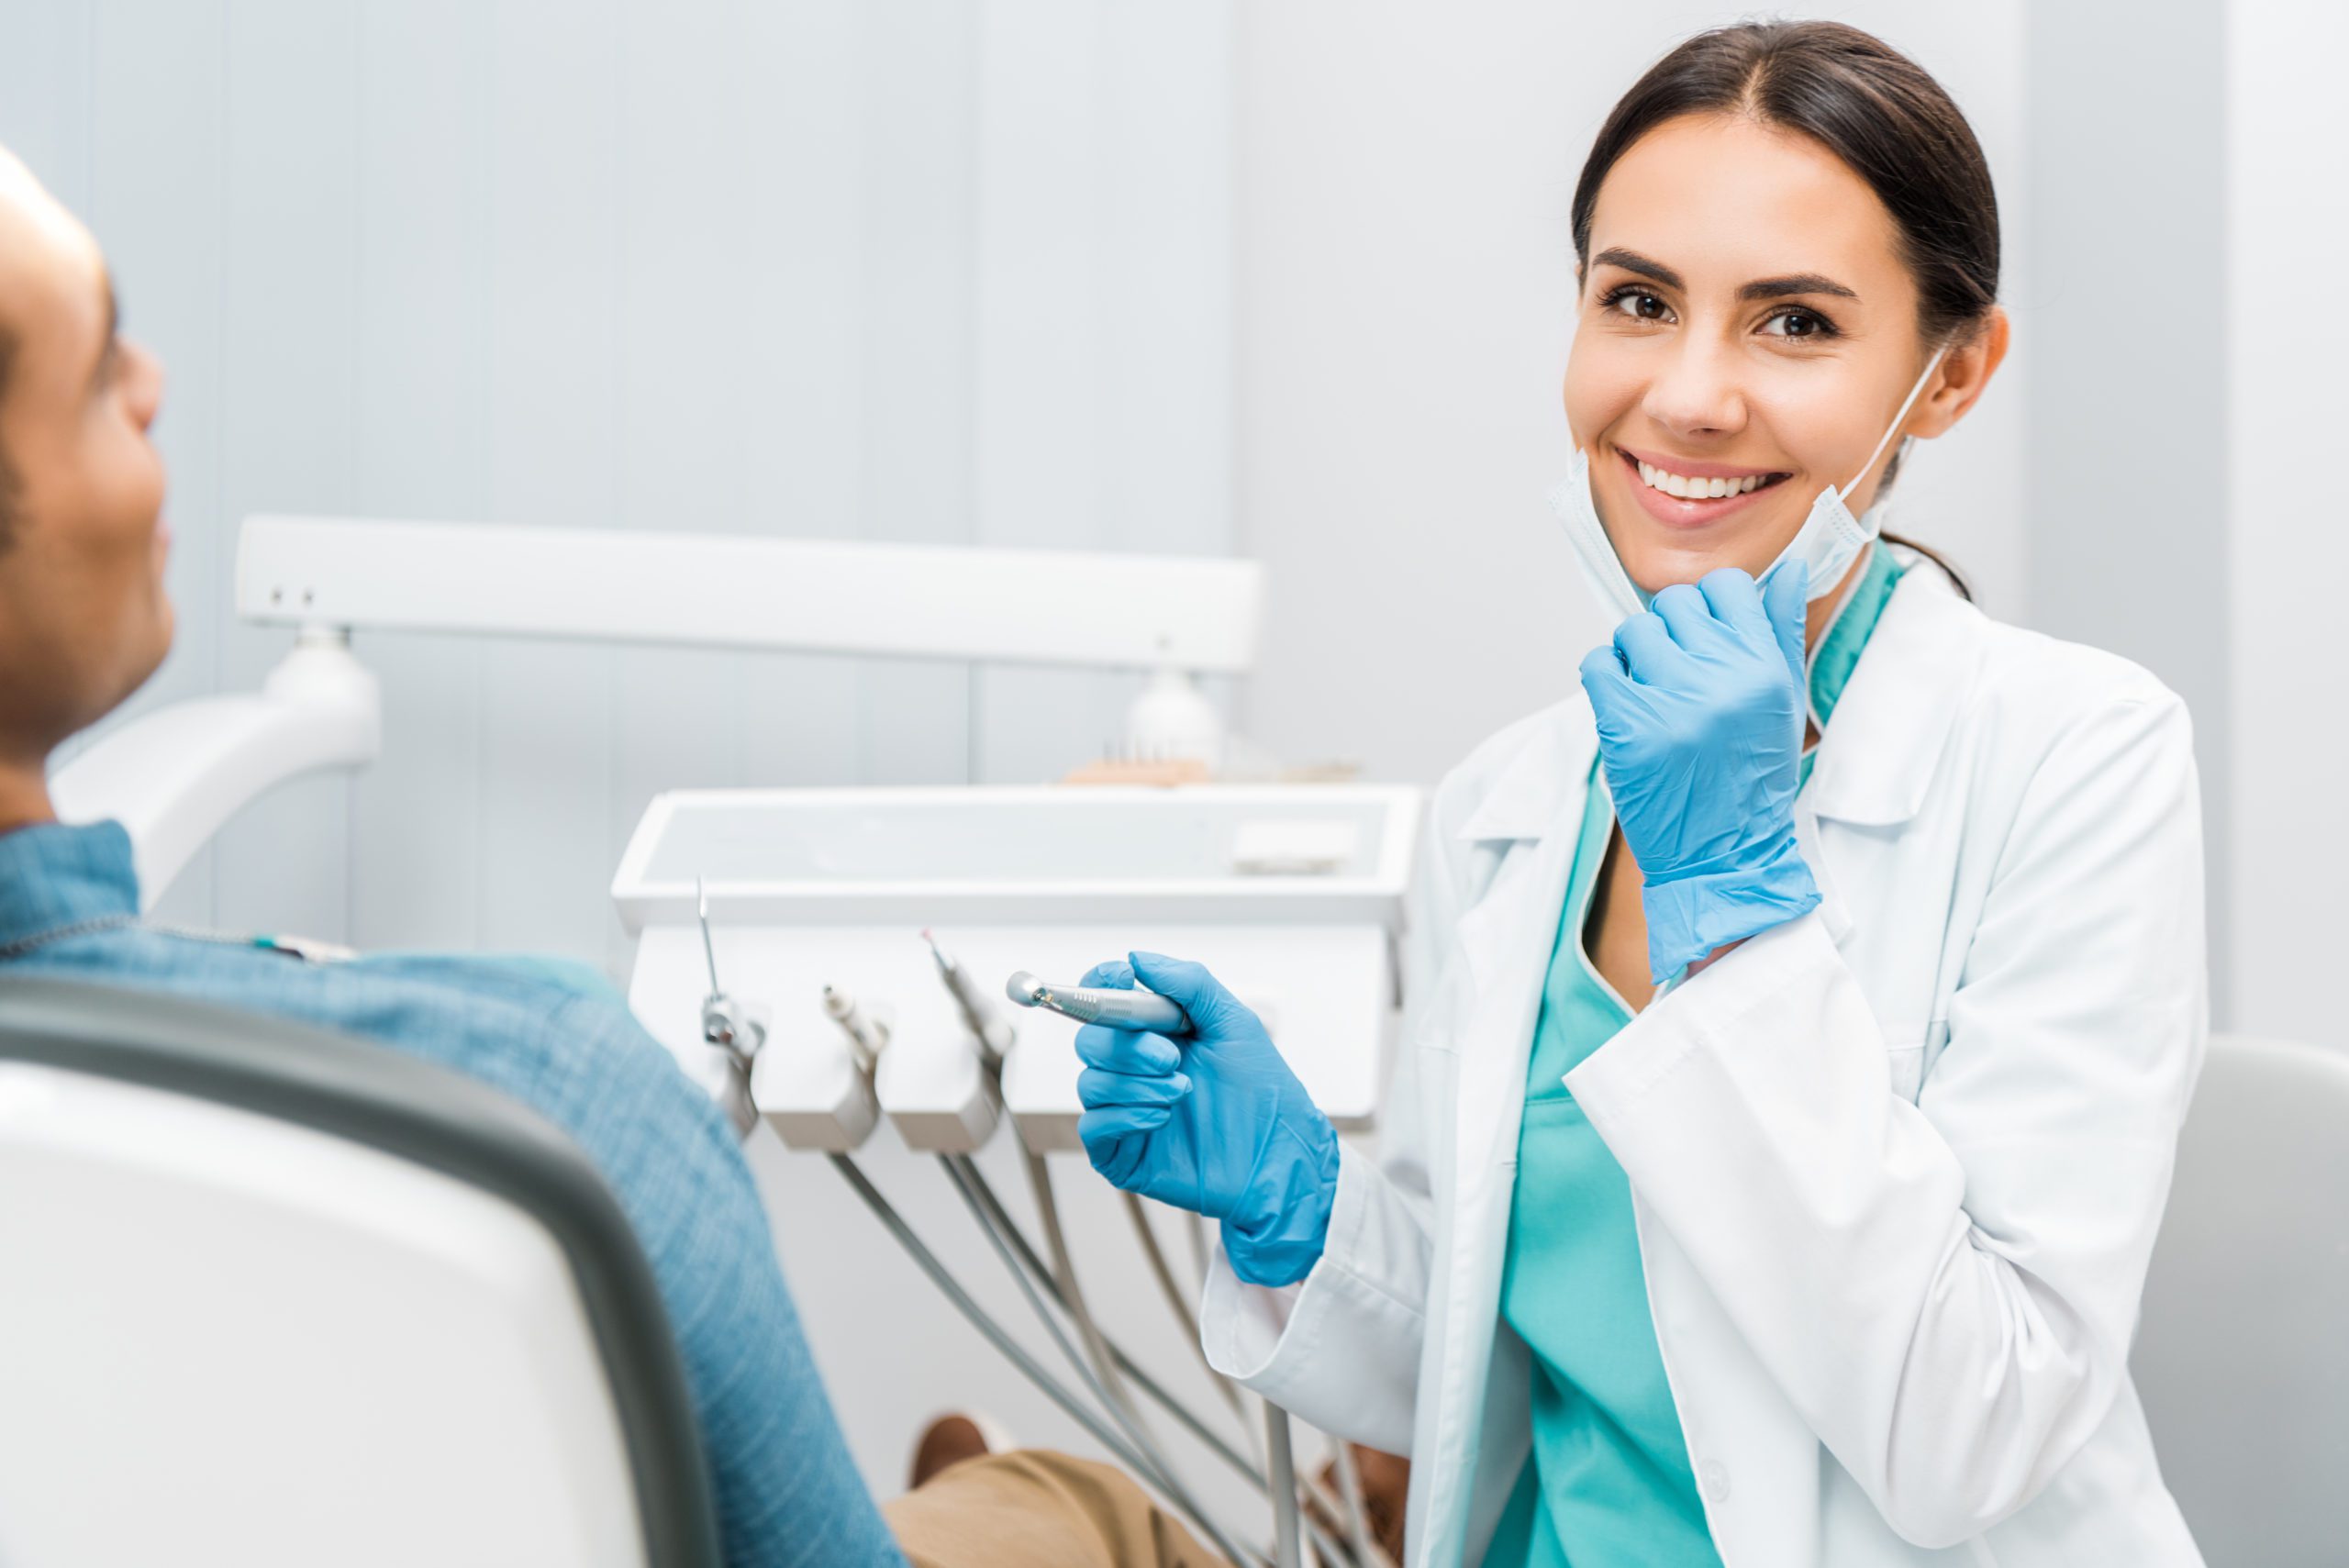 Cheerful female dentist holding drill and smiling near patient